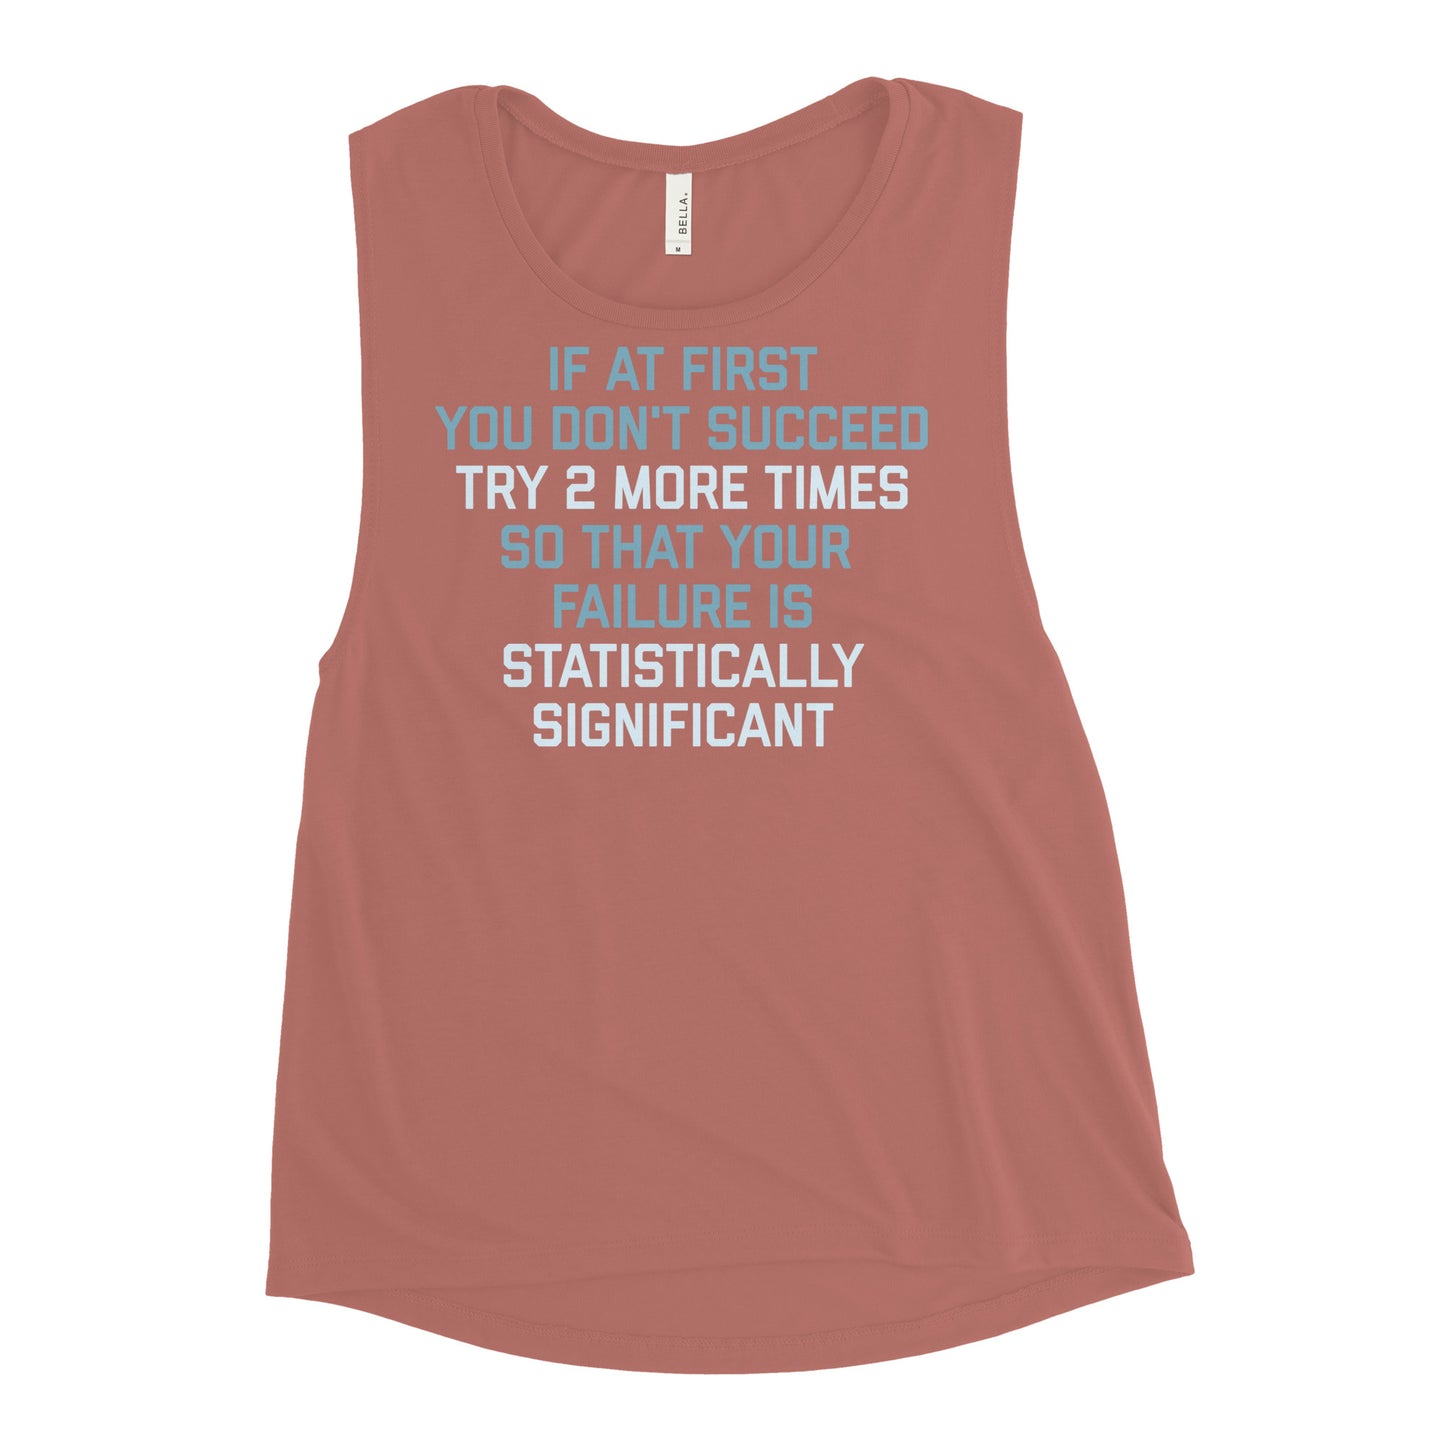 Try 2 More Times So That Your Failure Is Statistically Significant Women's Muscle Tank